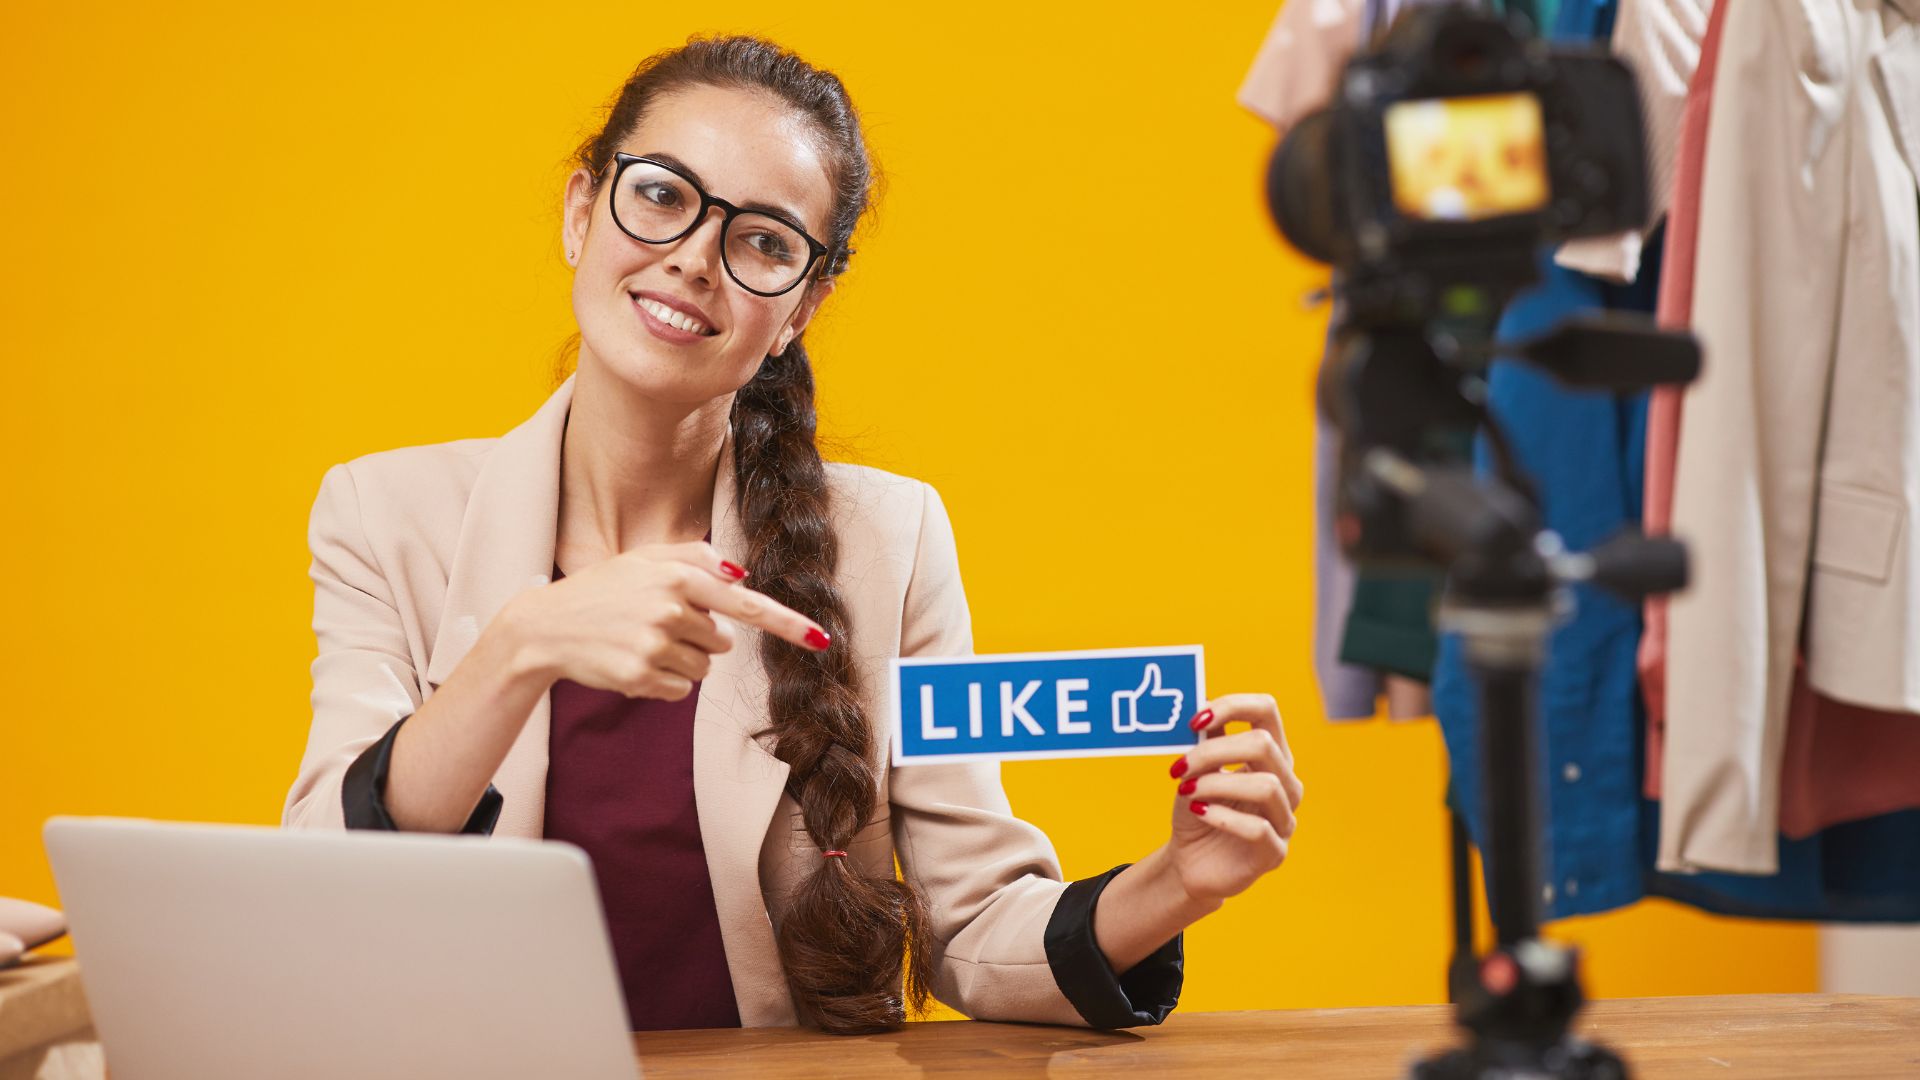 How Does Video Content Play A Significant Role In Social Media Marketing